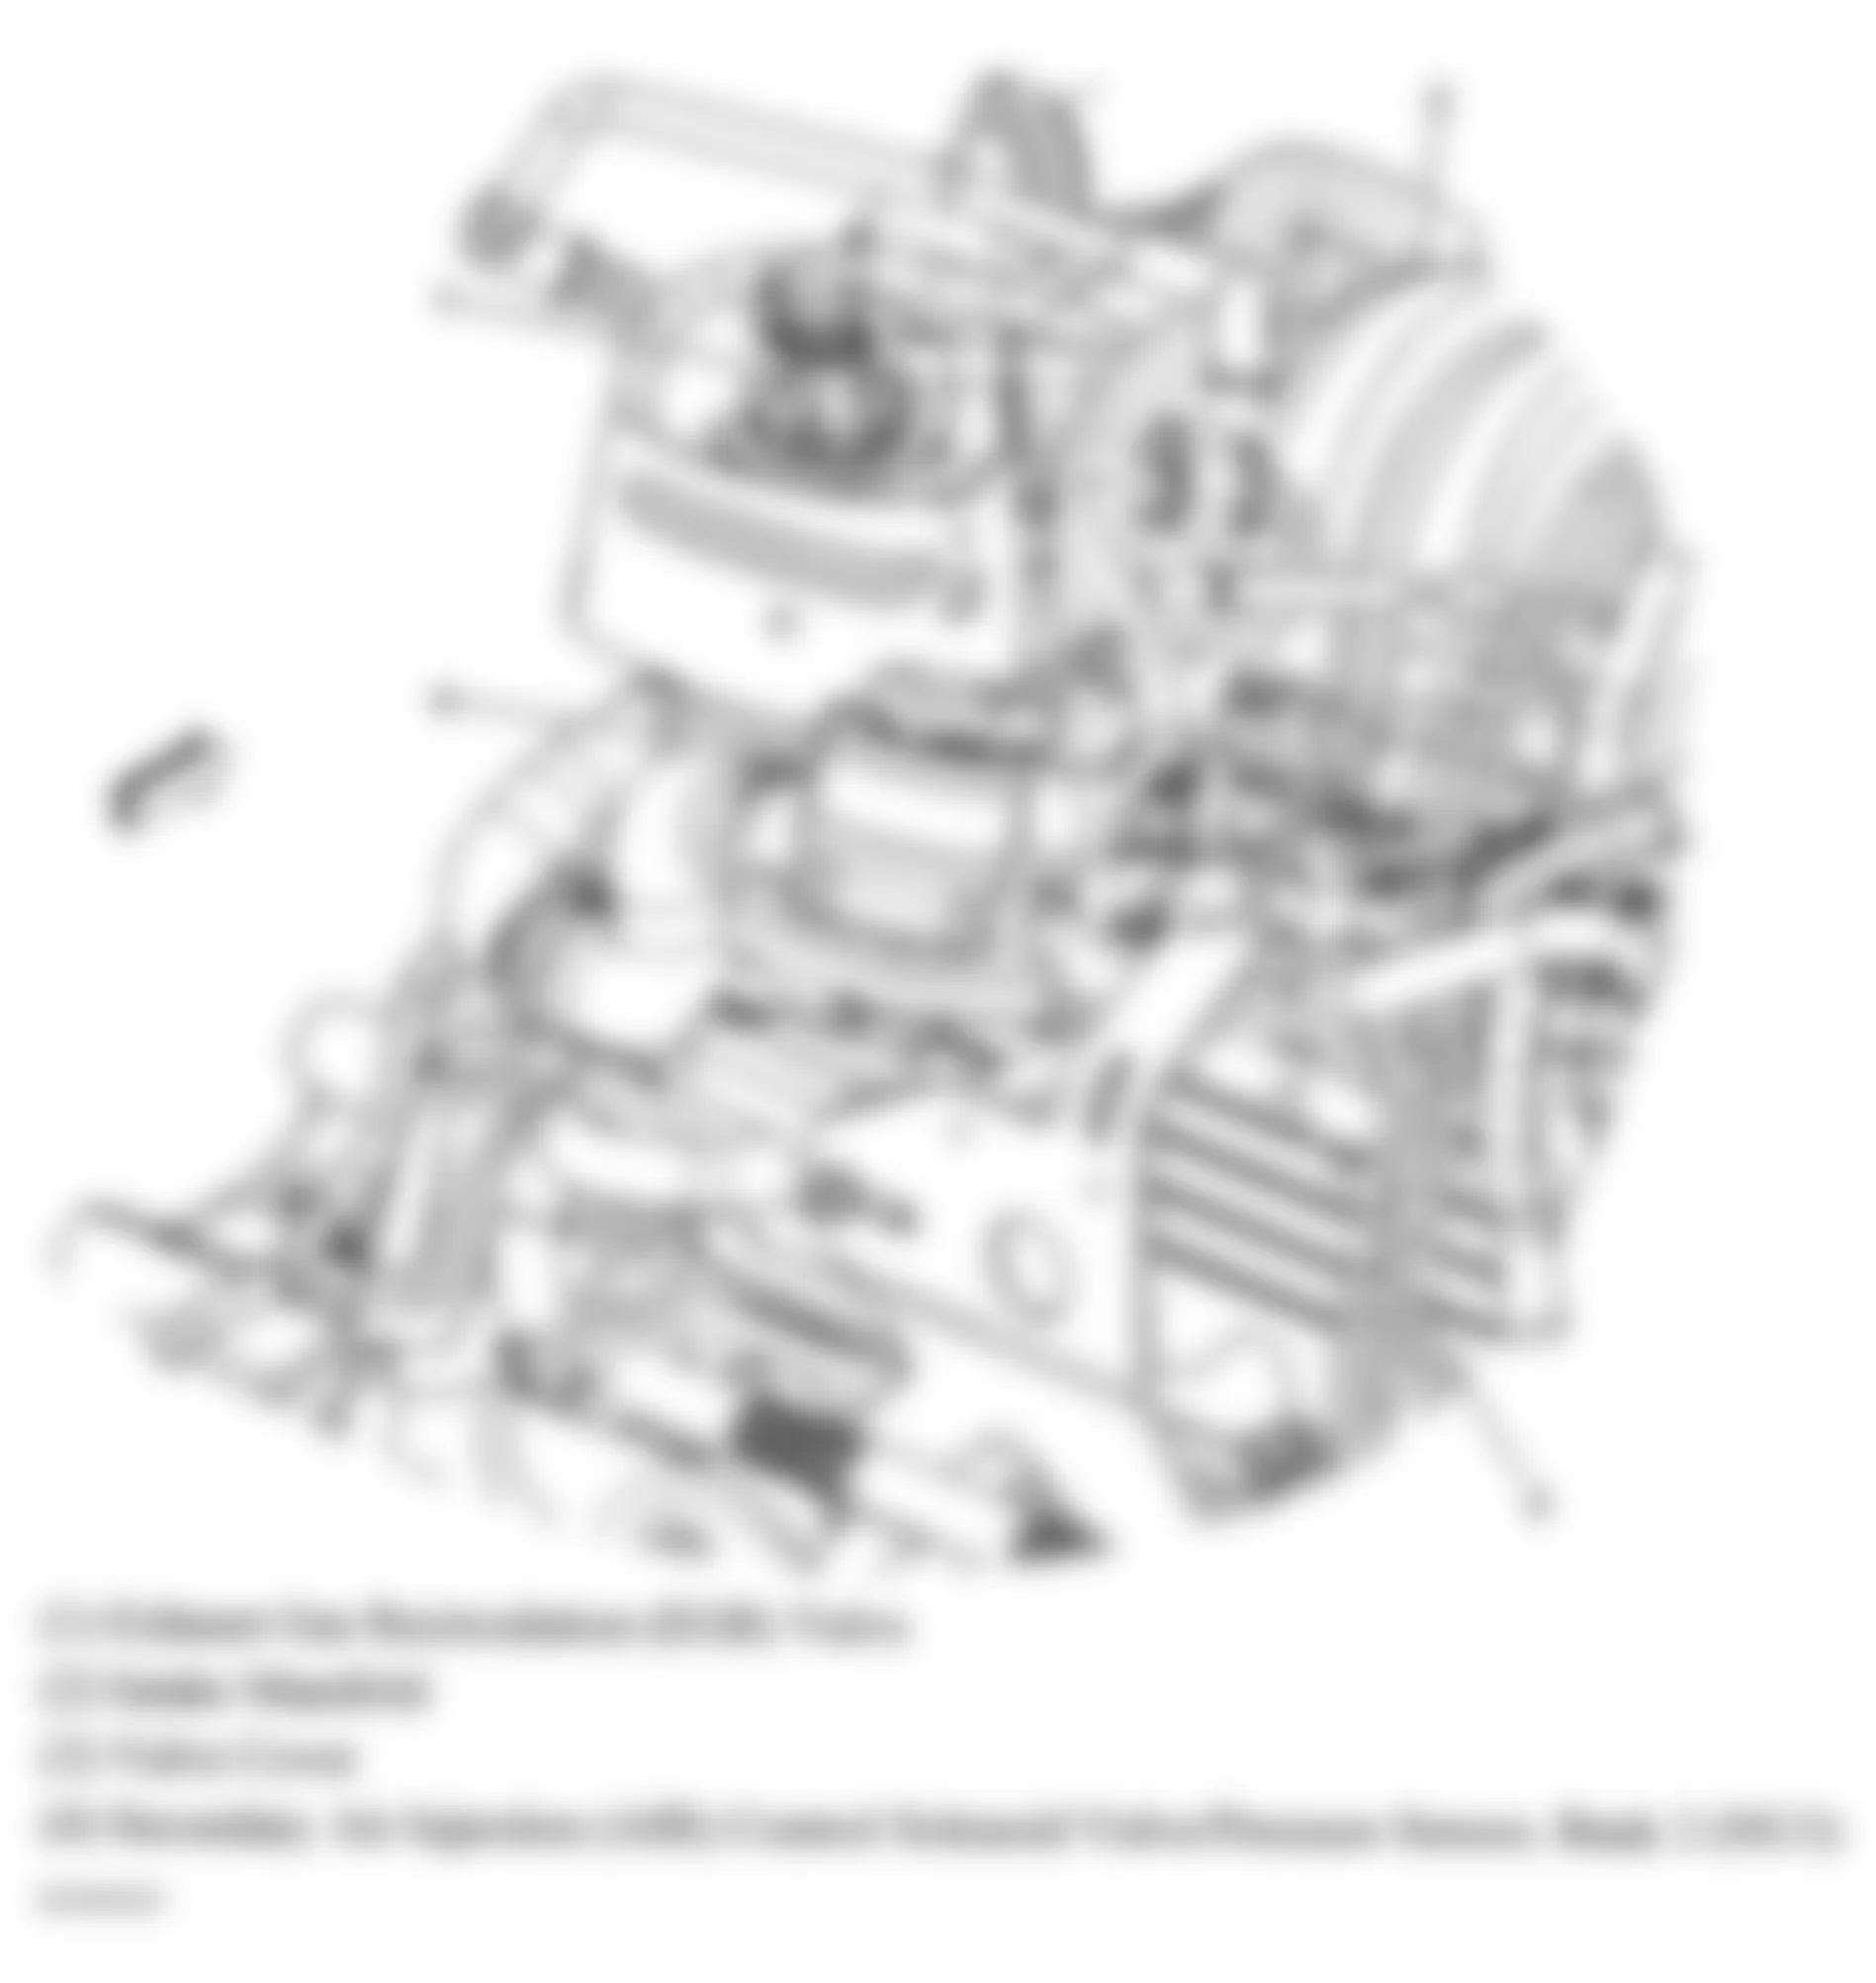 Buick Allure CX 2005 - Component Locations -  Upper Rear Of Engine (3.8L)